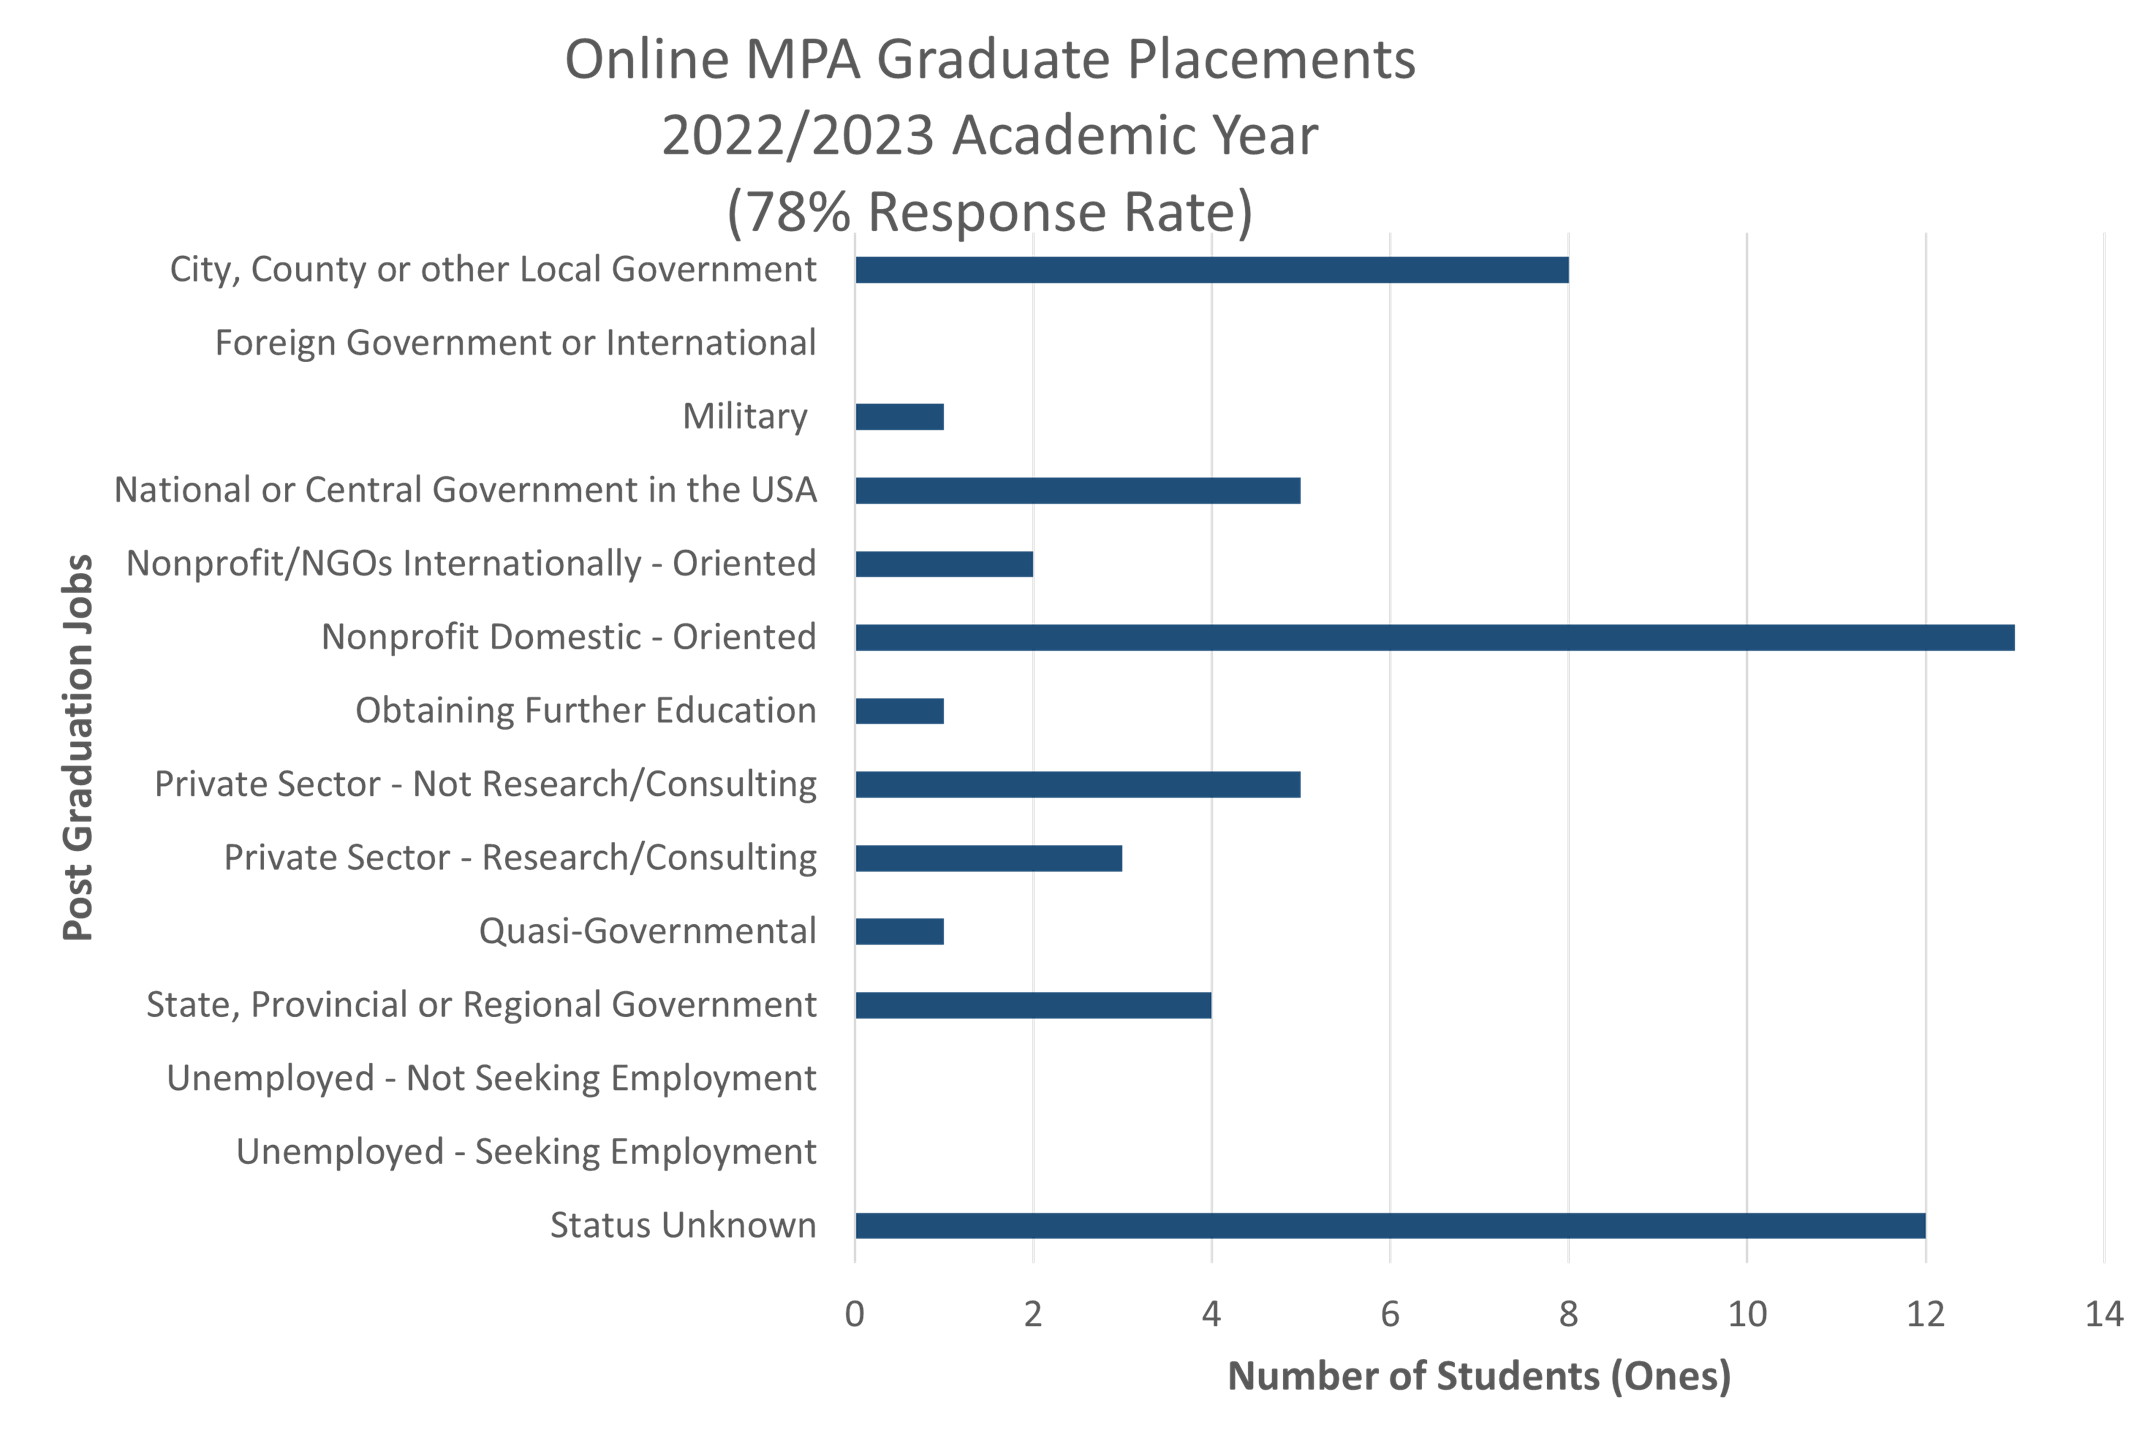 A graph illustrating the online graduate placements from the Master of Public Administration program, as of 2021-2022